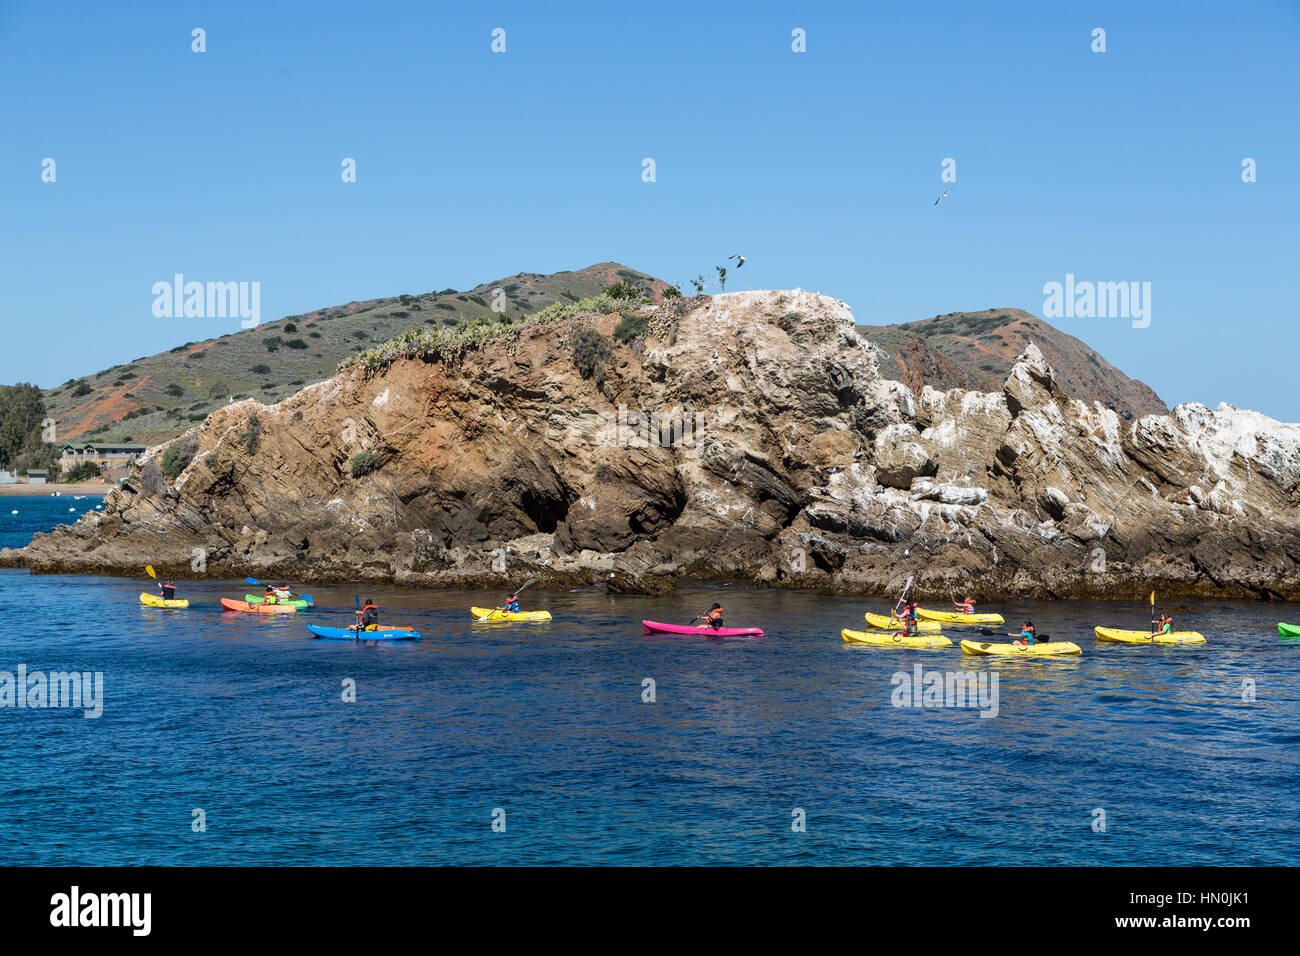 A group of kayakers explore the coastline near Two Harbors on Catalina Island. Stock Photo